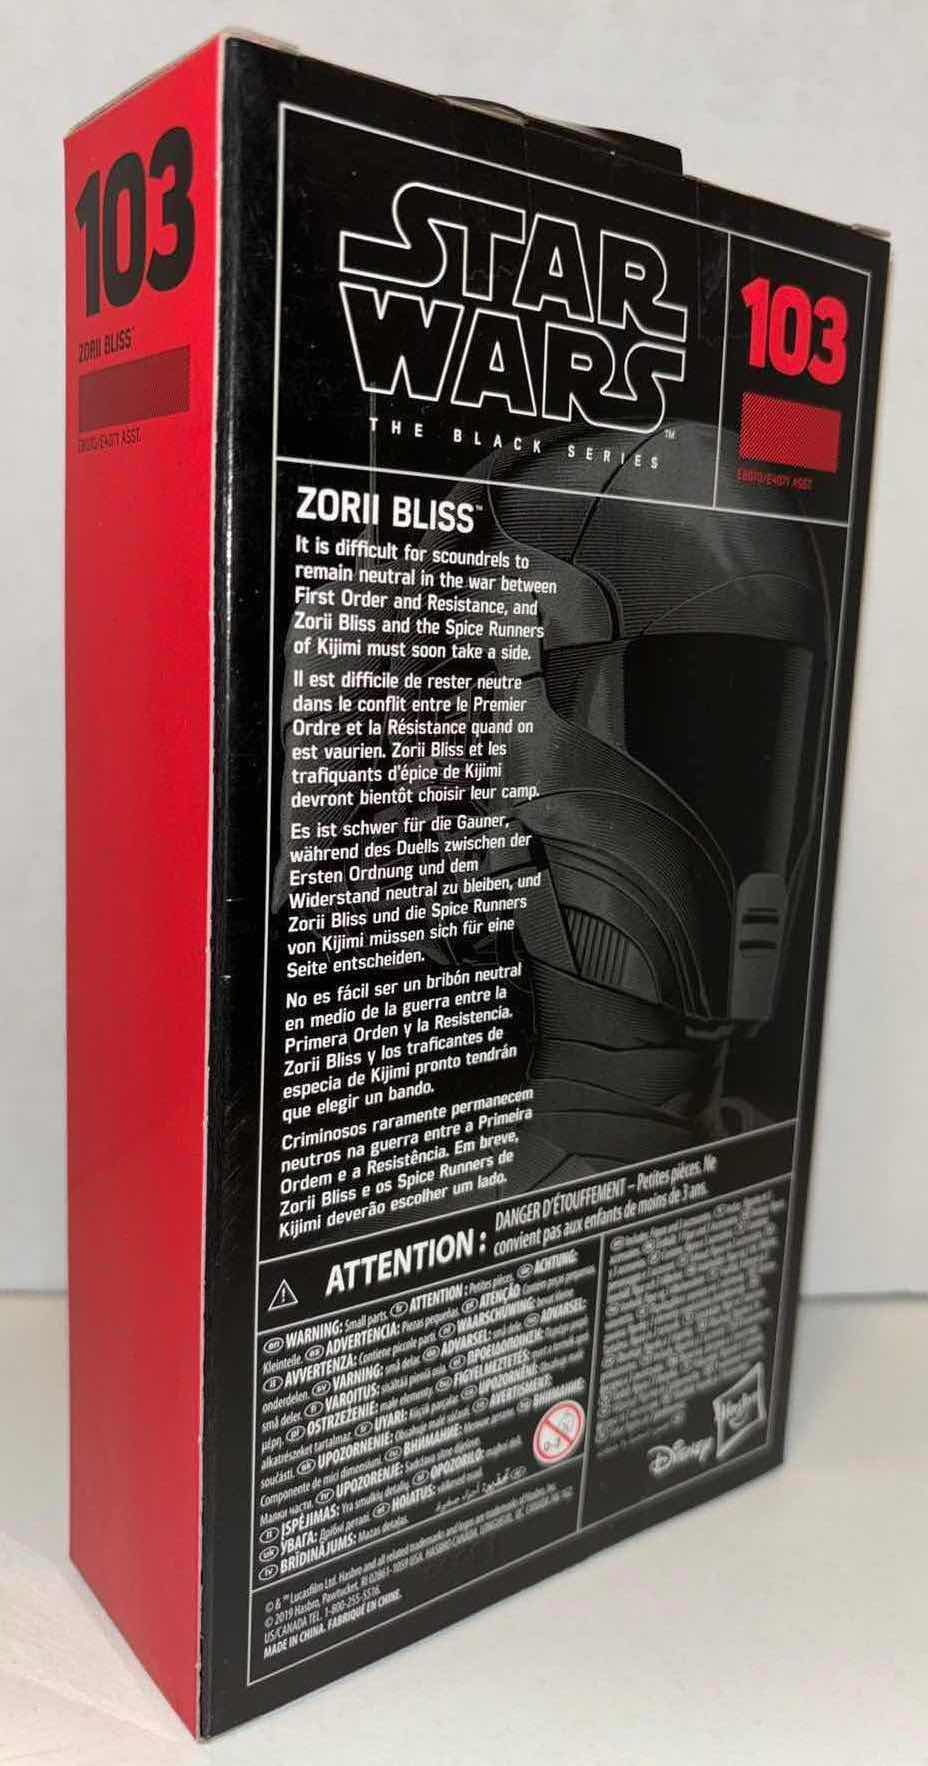 Photo 3 of NEW HASBRO STAR WARS THE BLACK SERIES ACTION FIGURE & ACCESSORIES, #103 “ZORII BLISS”